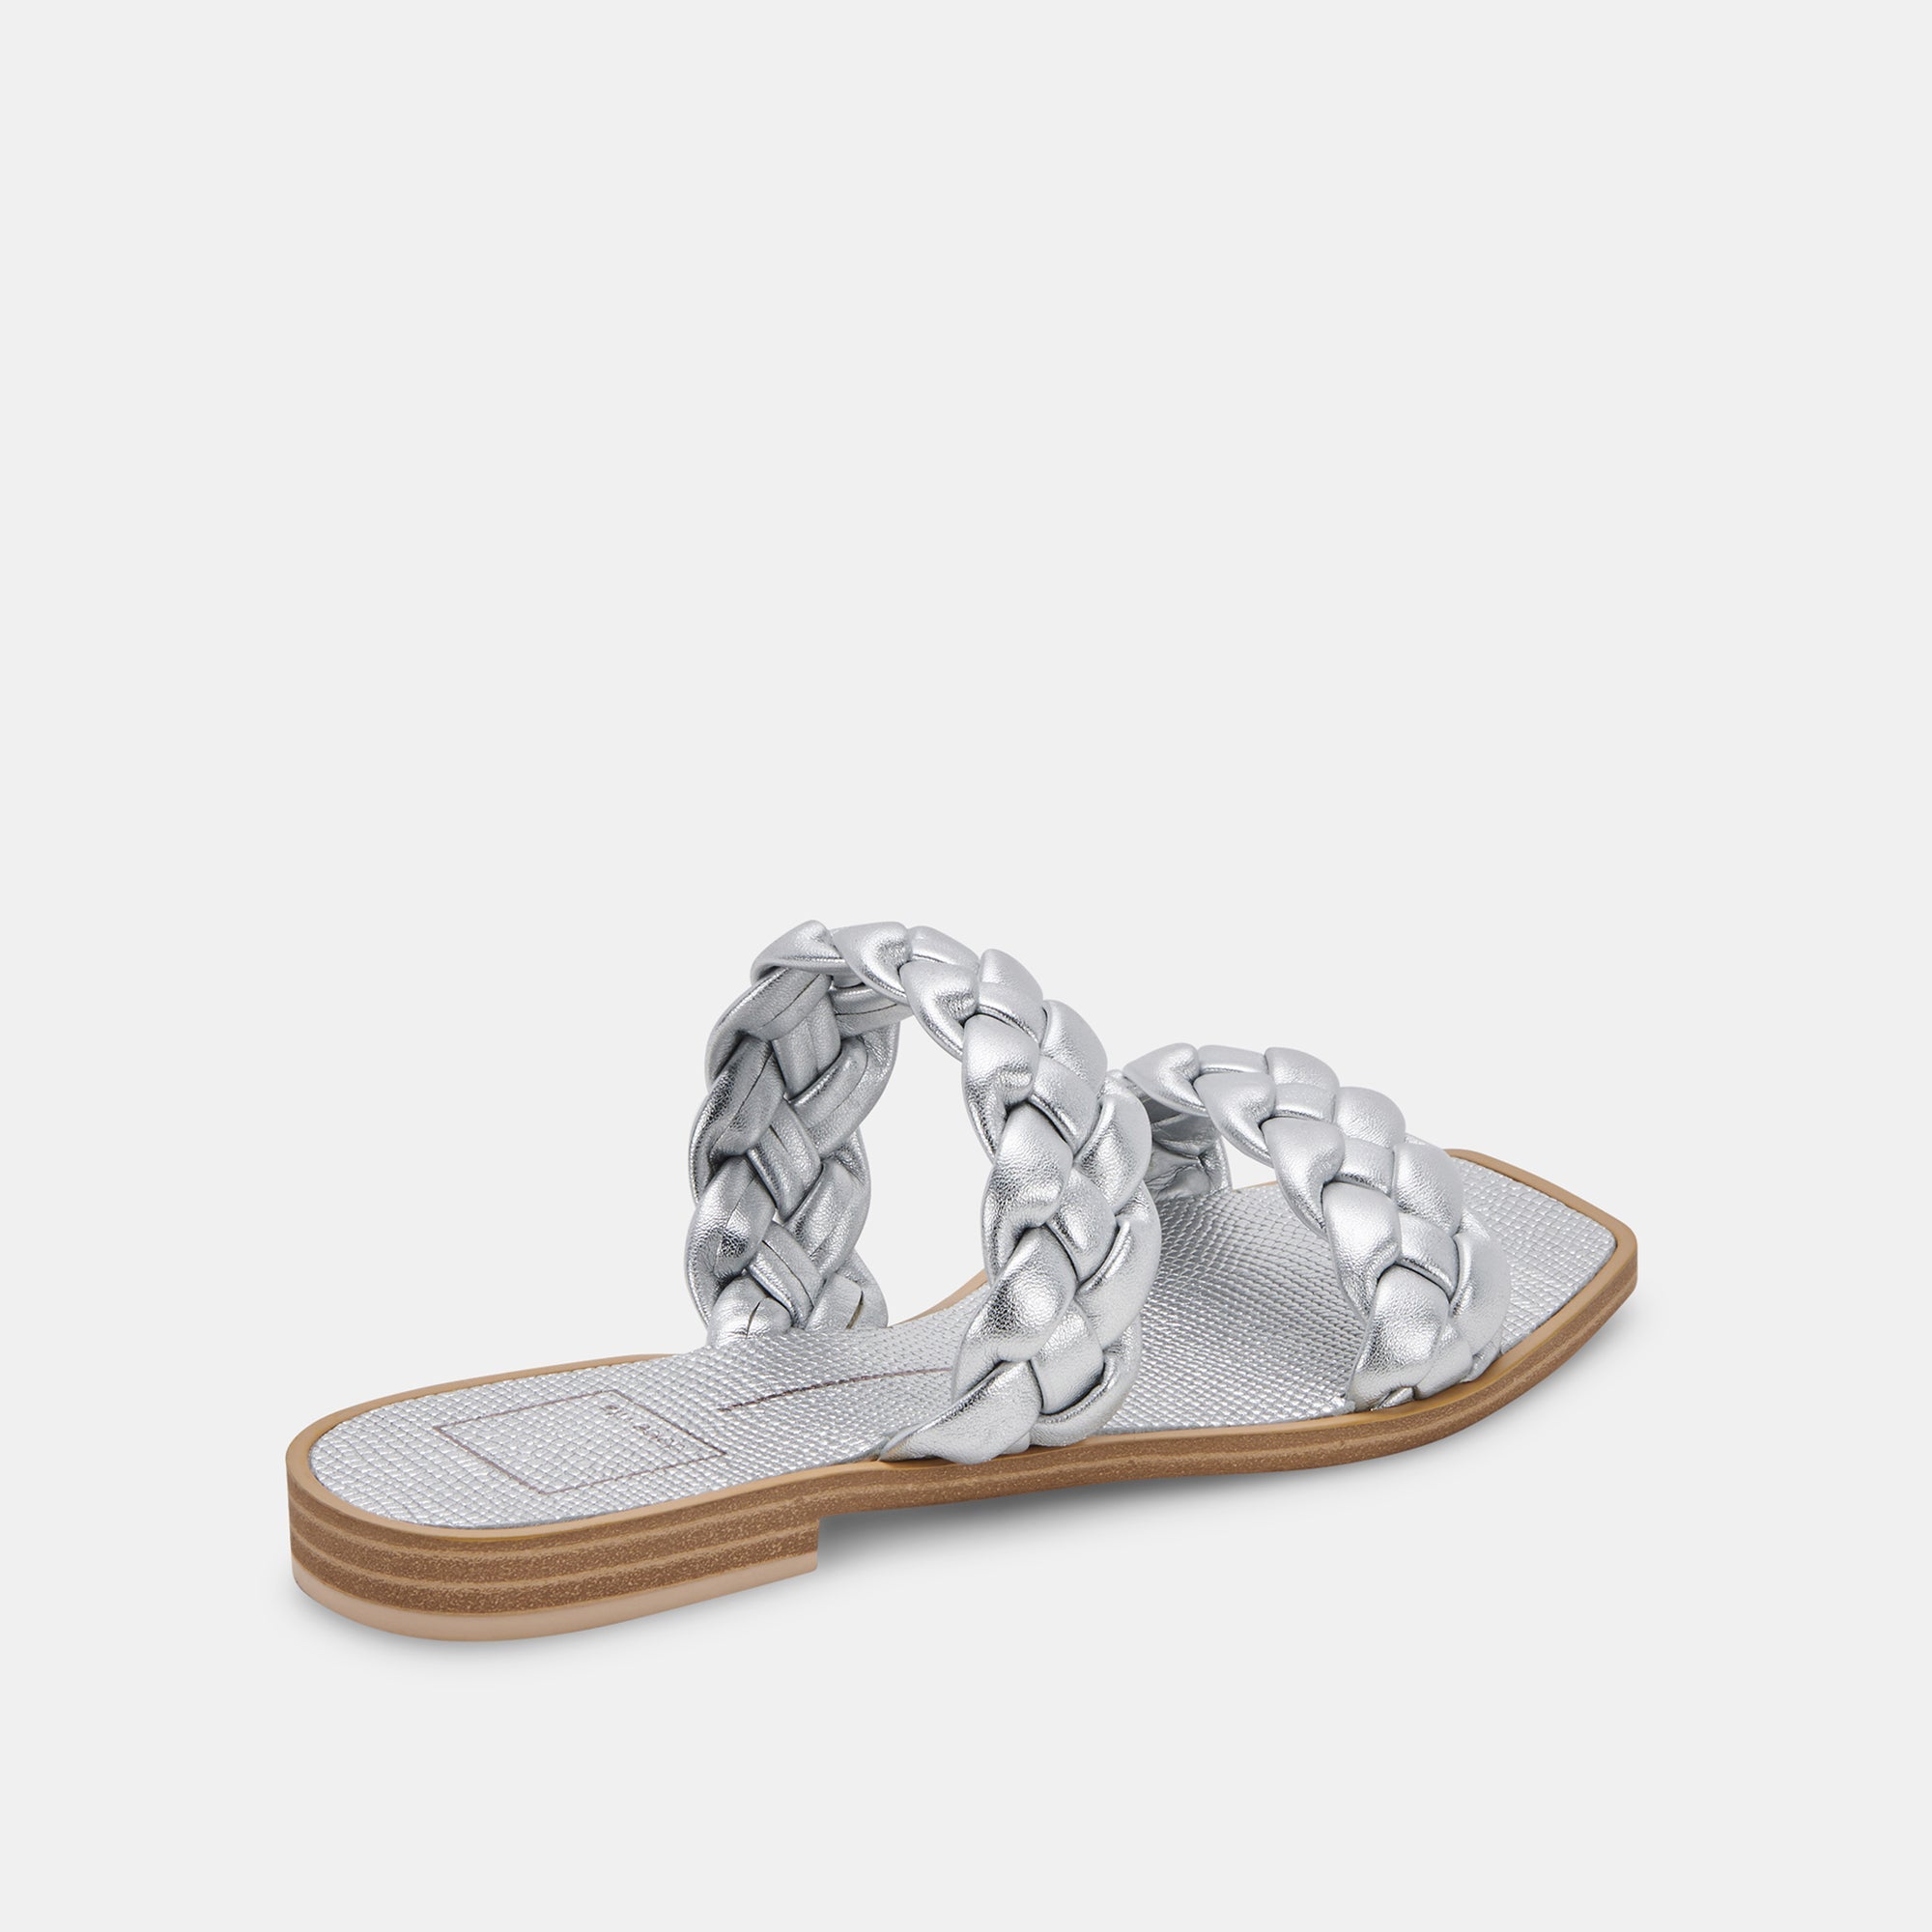 Indy Sandals in Silver Metallic